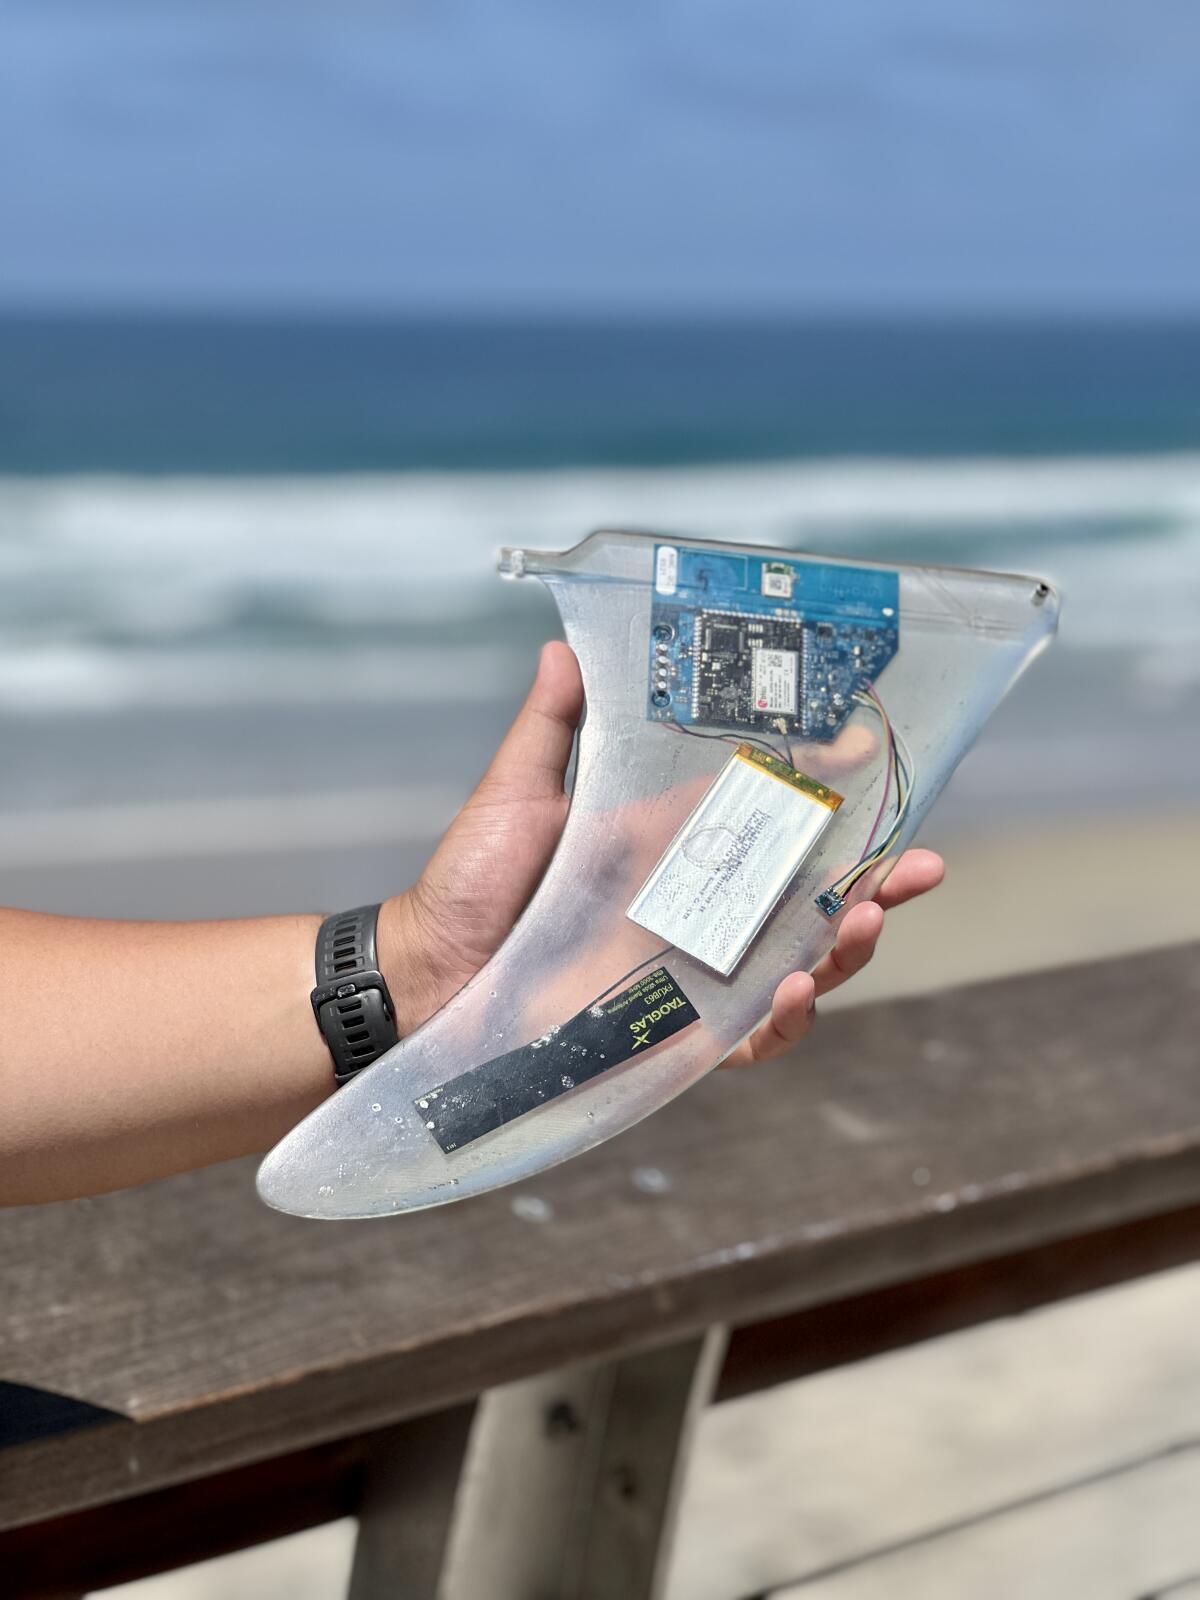 The Smartfin replaces a surfboard's fin to help scientists track temperatures in the waves.